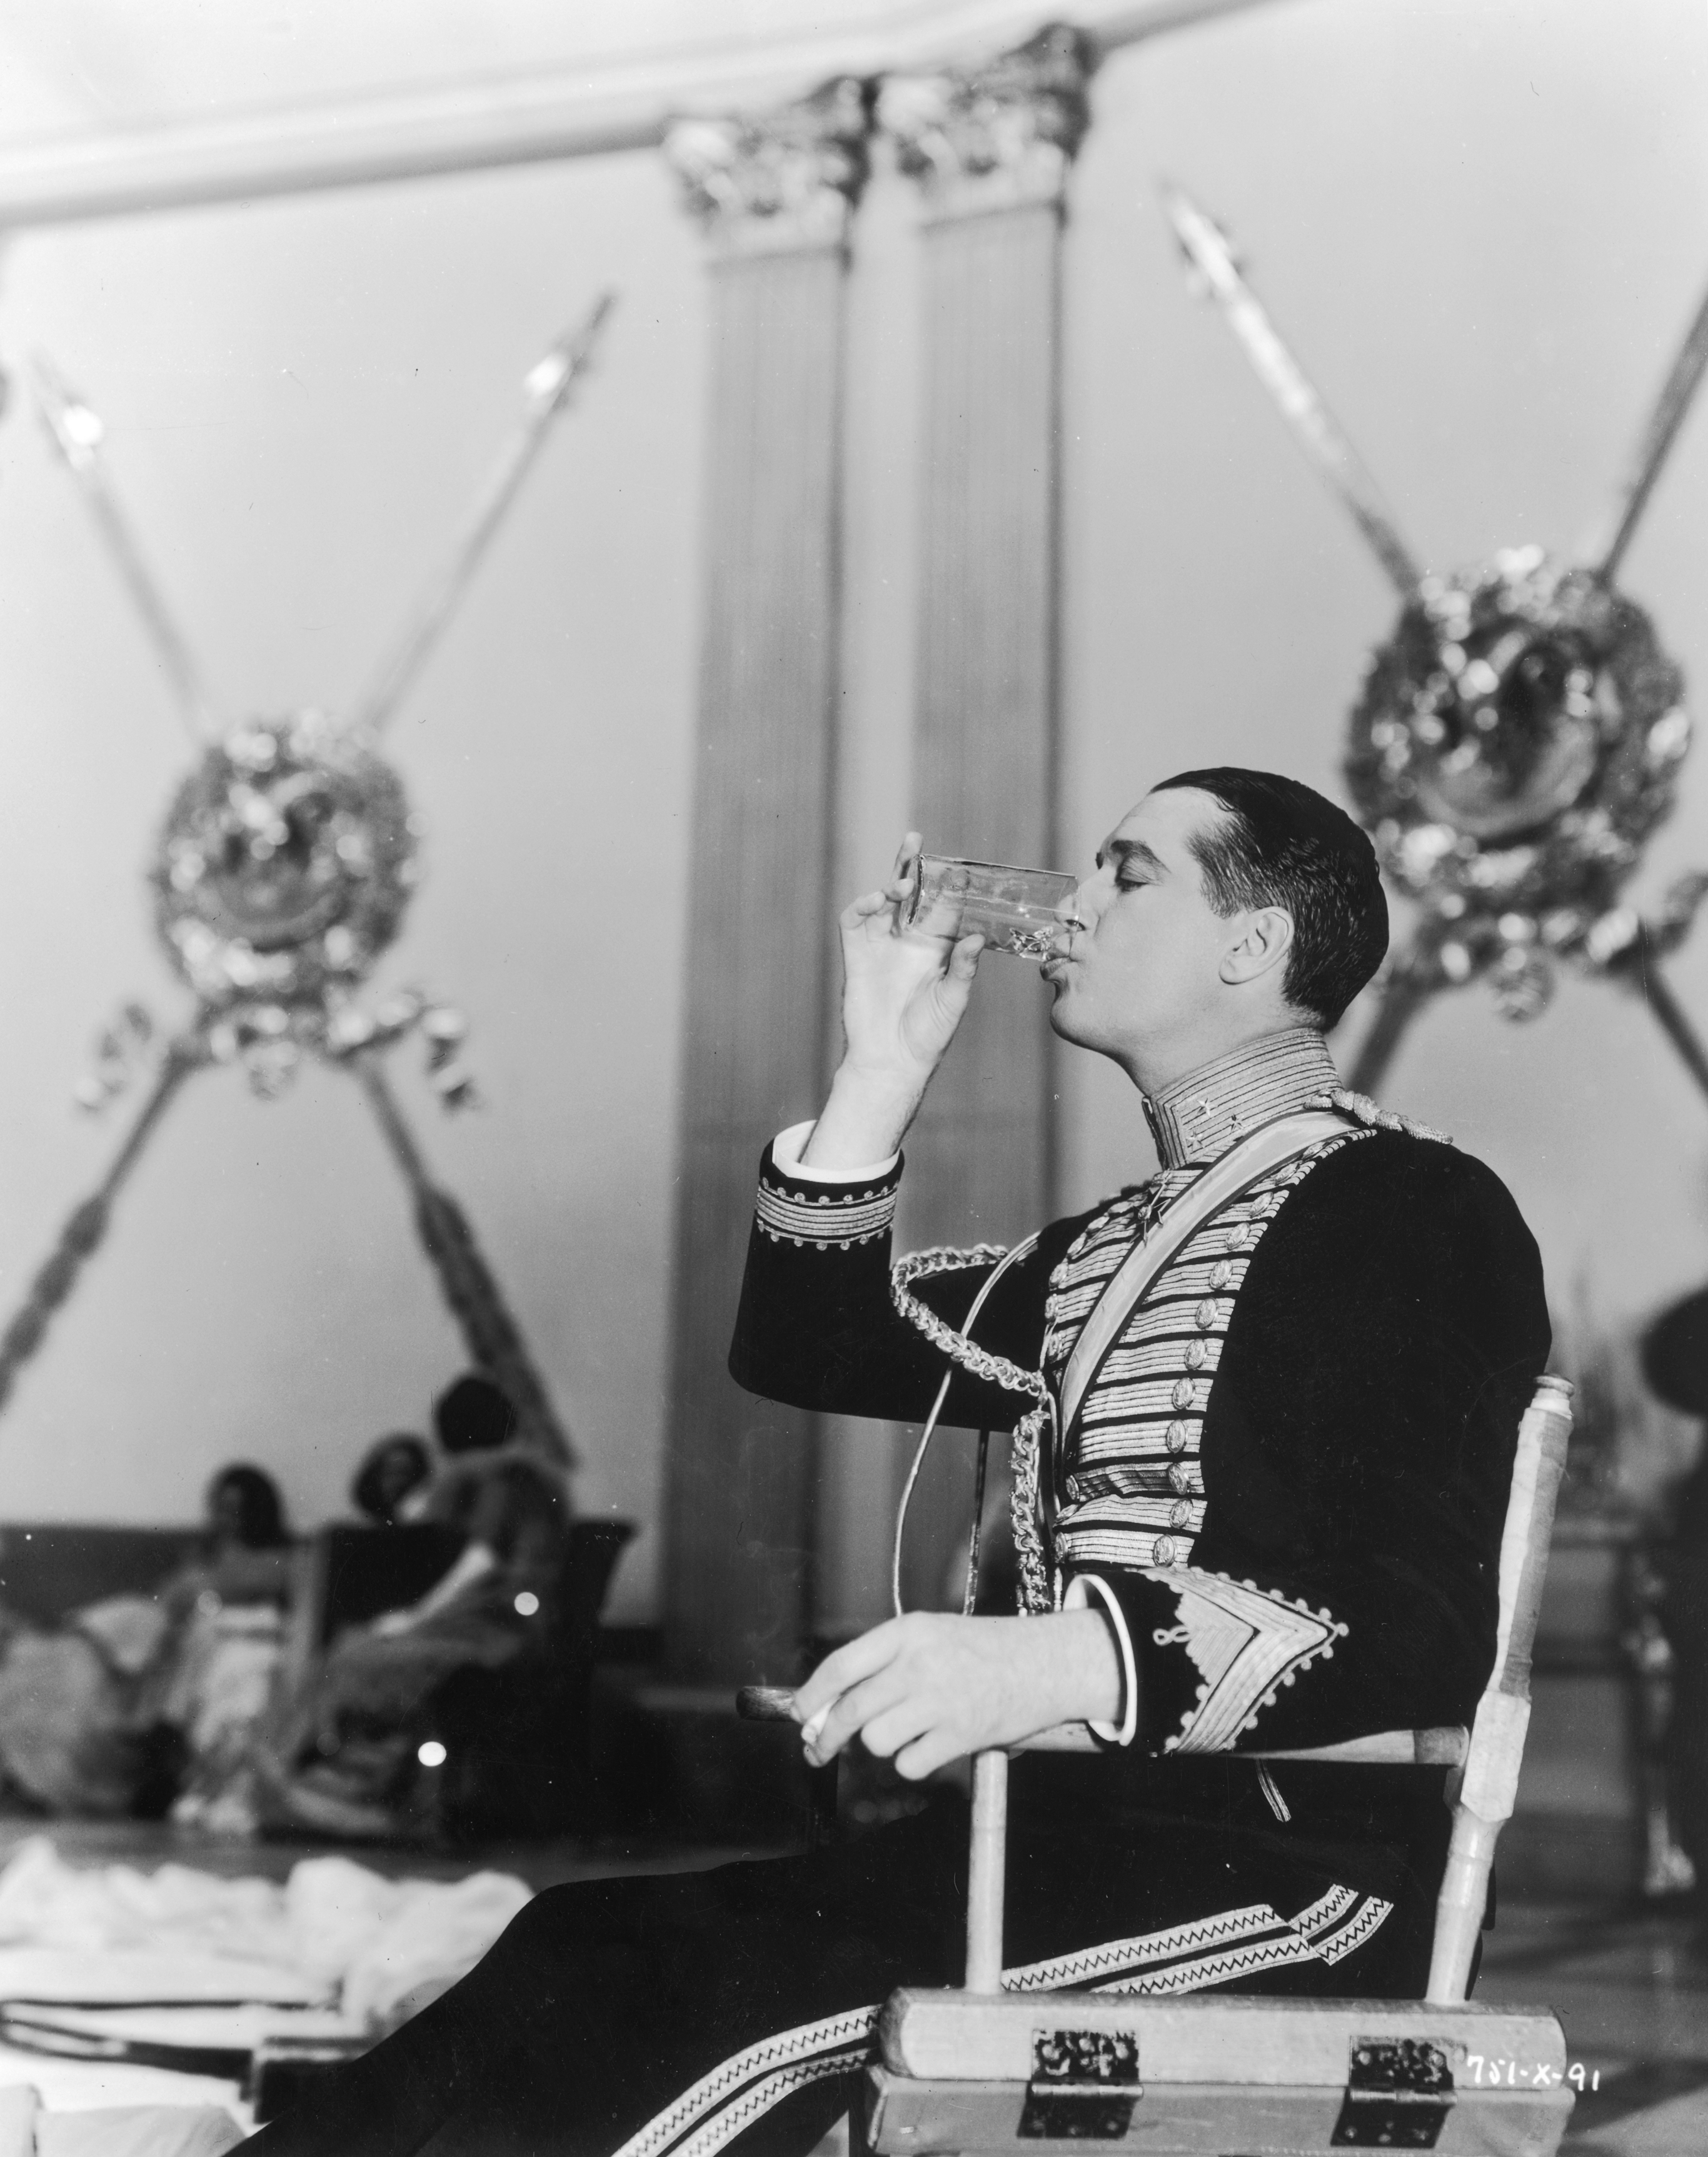 1934: Profile view of French actor Maurice Chevalier drinking a glass of water while seated in a folding chair on the set of director Ernst Lubitsch's film, 'The Merry Widow'. Chevalier wears a military uniform.